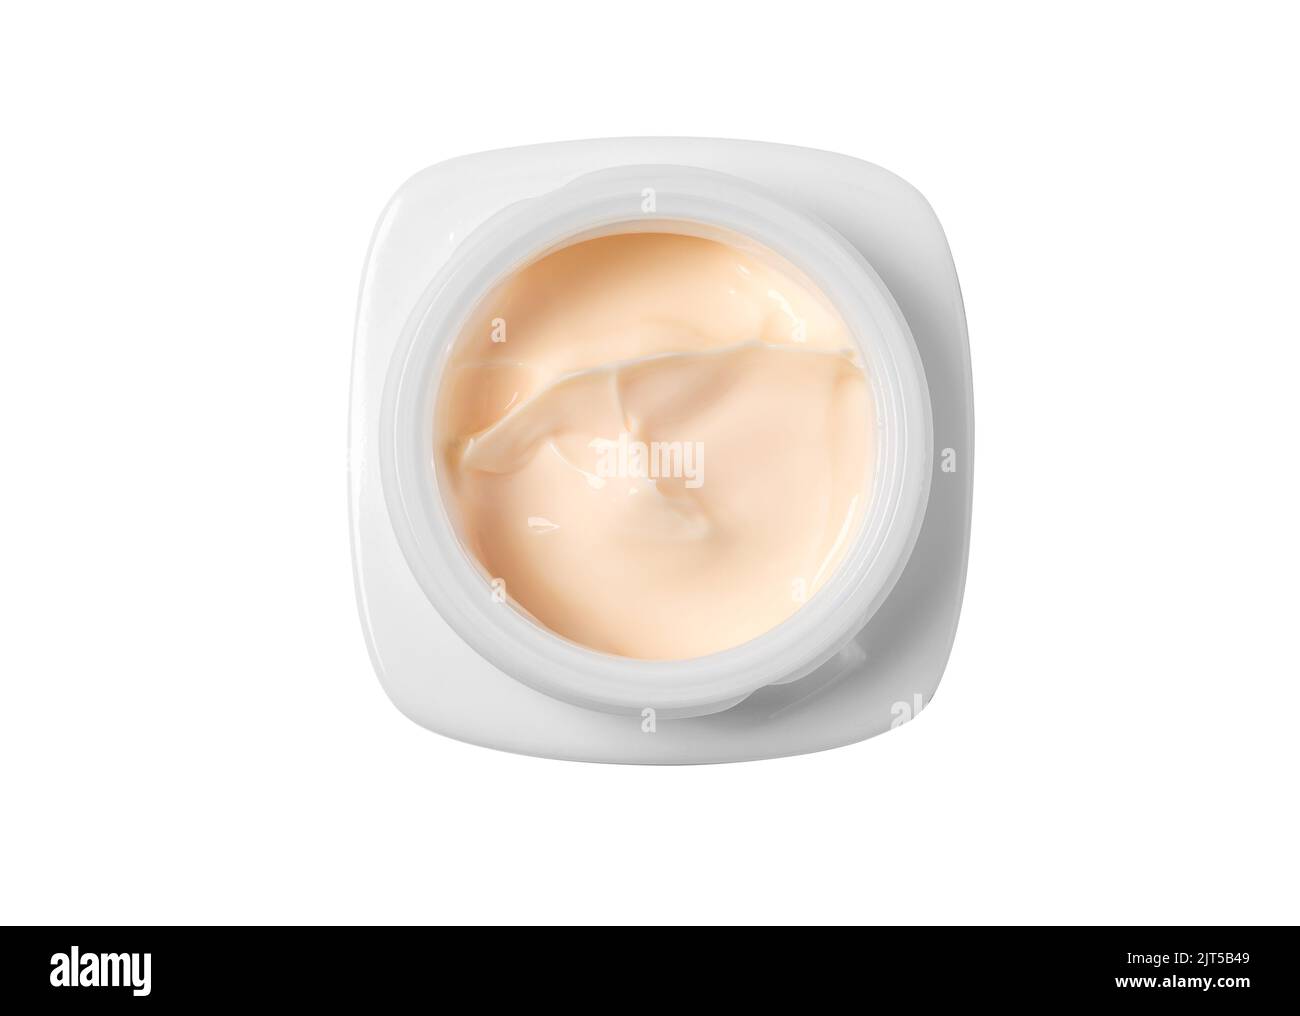 Hygienic cream, top view isolated on a white background with clipping path Stock Photo